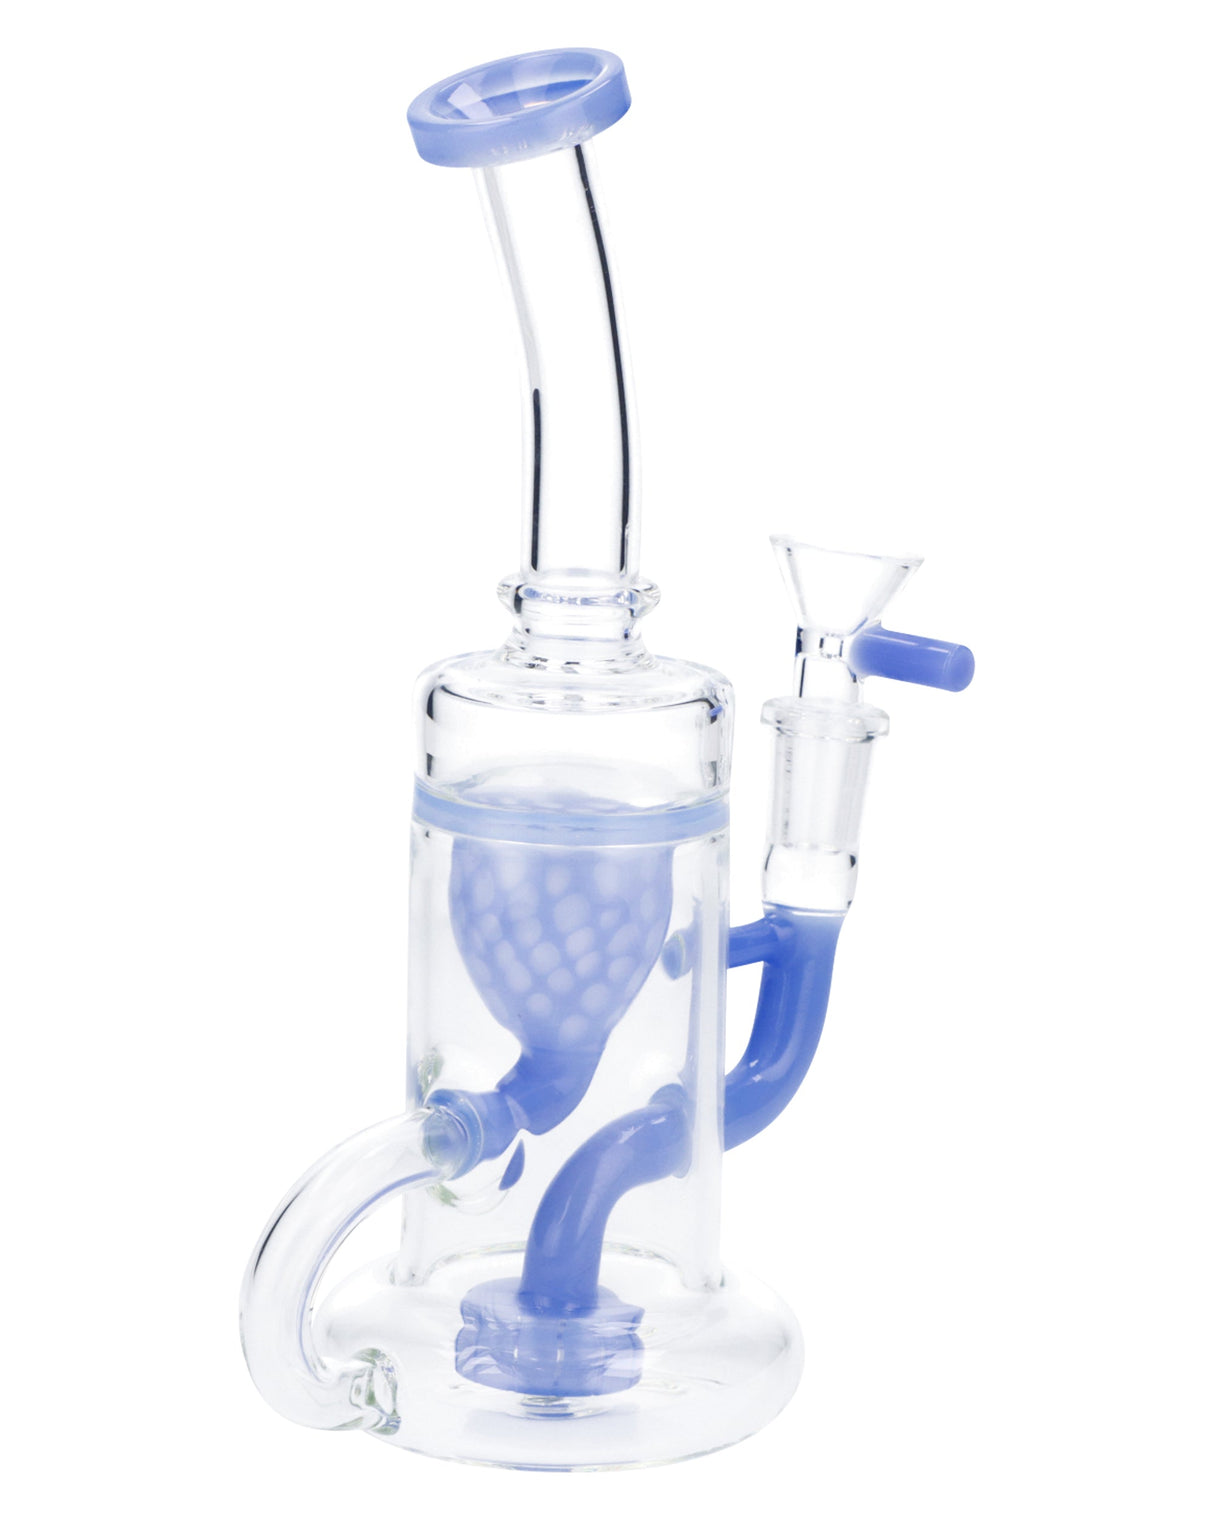 Milky Blue Quartz Water Pipe, Bent Neck & Bowl, 8 inch, 90 Degree Joint, For Dry Herbs & Concentrates